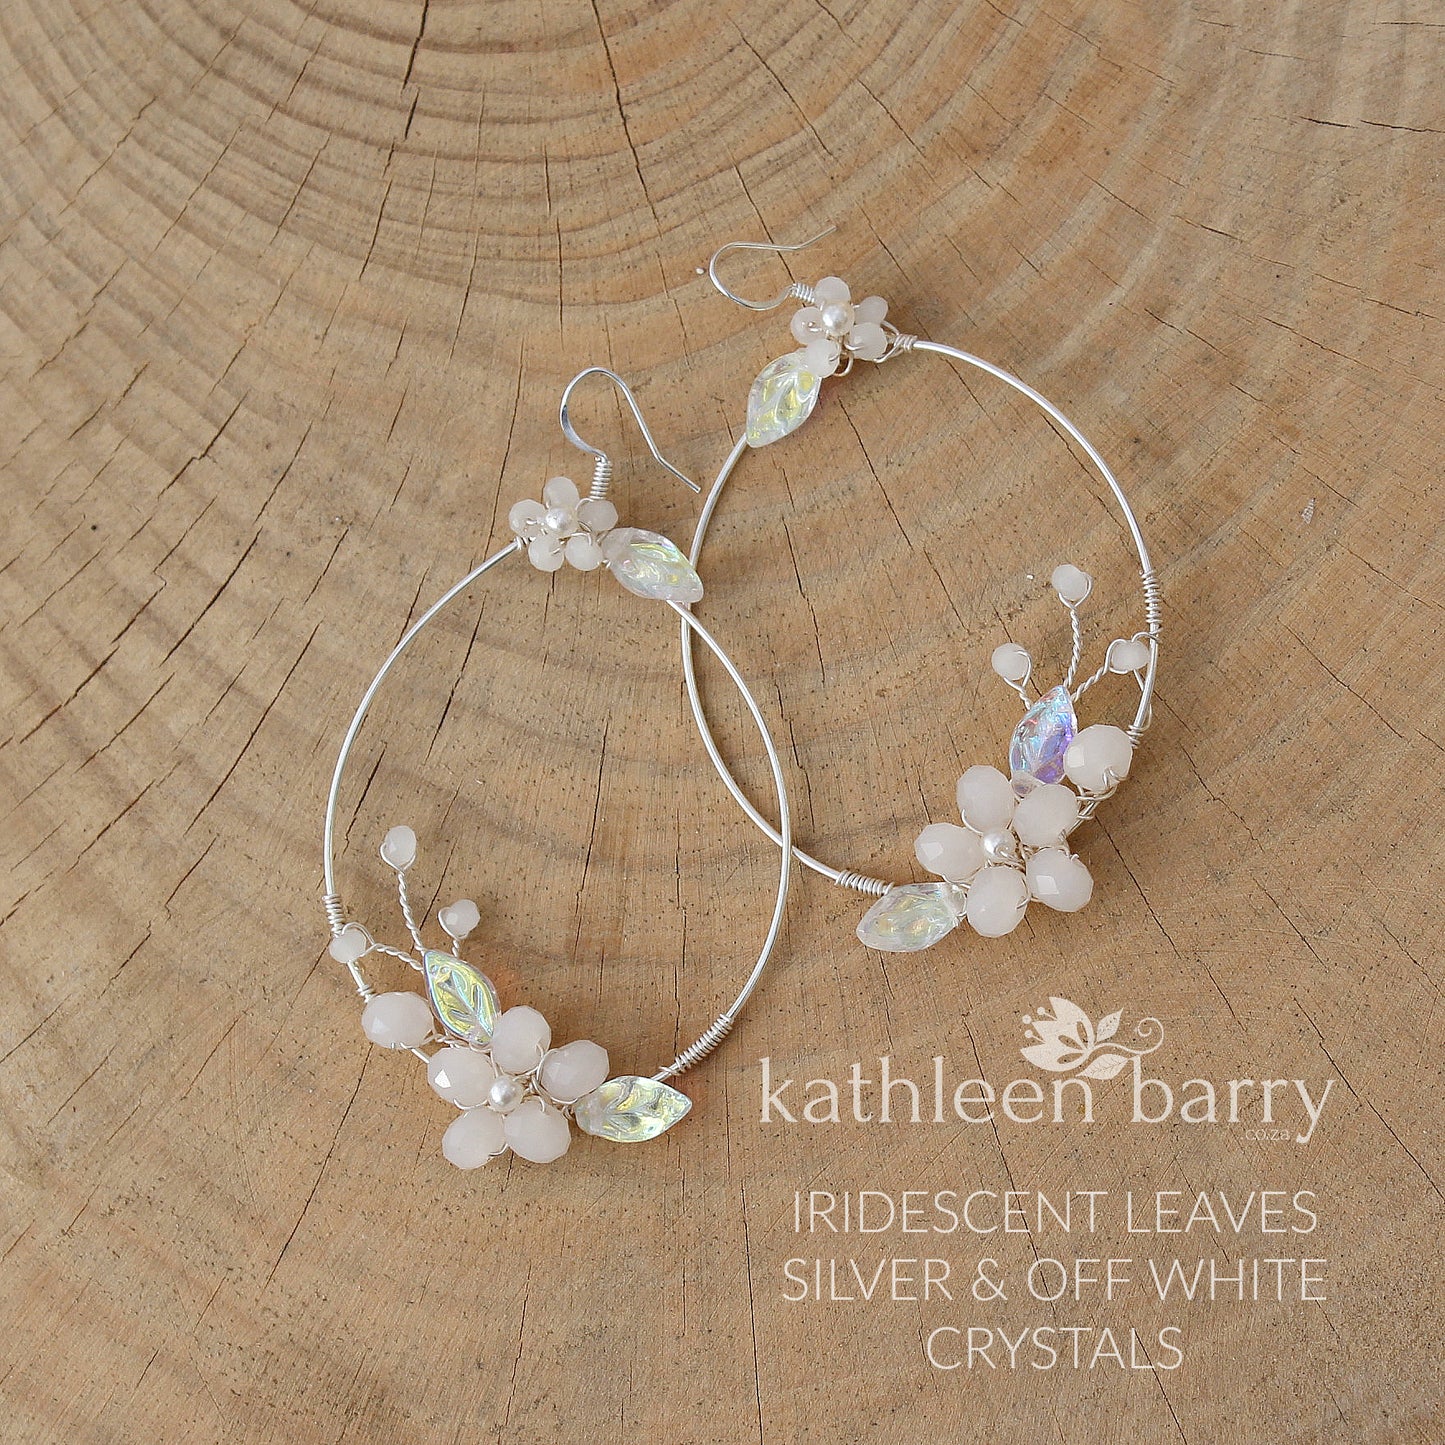 Quinn floral hoop earrings - color & metallic options available